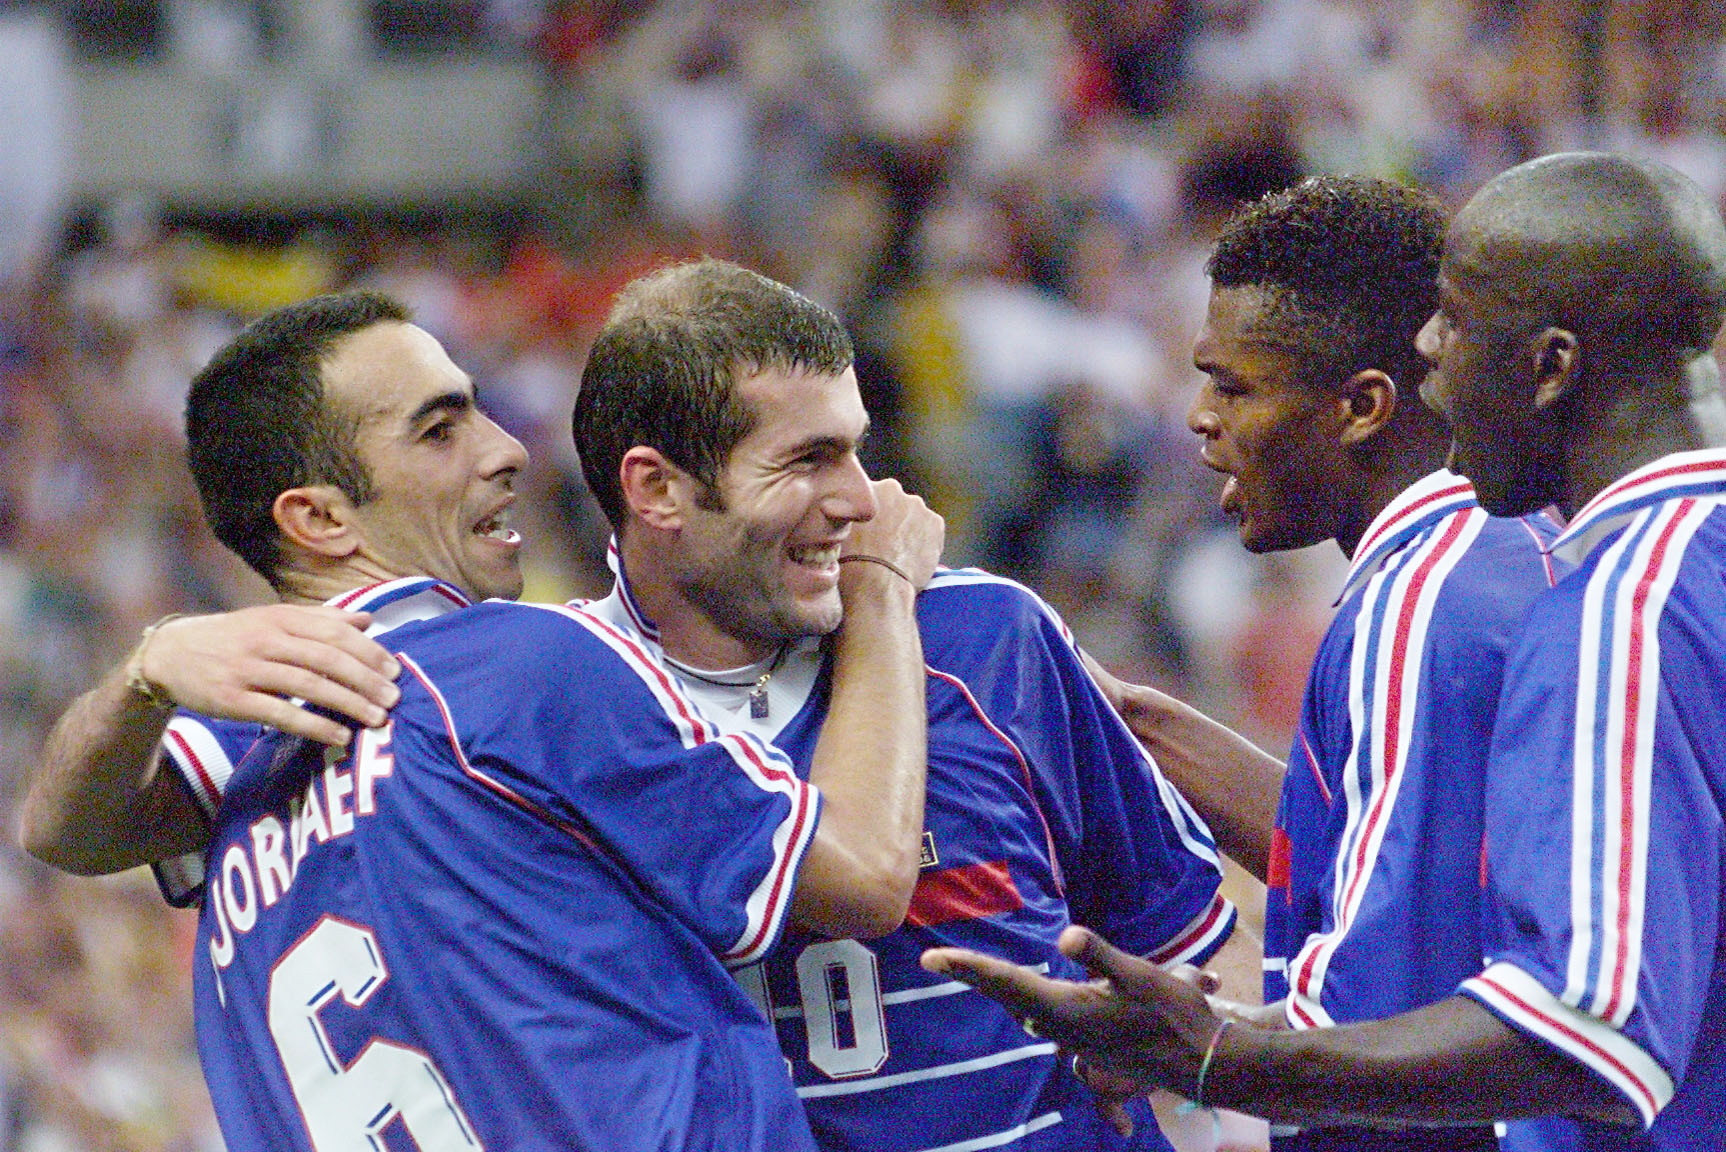 France enjoyed the benefits of an exceptionally diverse squad as they lifted the World Cup in 1998. Zinedine Zidane, second left, is seen here being hugged by teammates Youri Djorkaeff, left, Marcel Desailly and Lilian Thuram, right, in the final against Brazil ©Getty Images